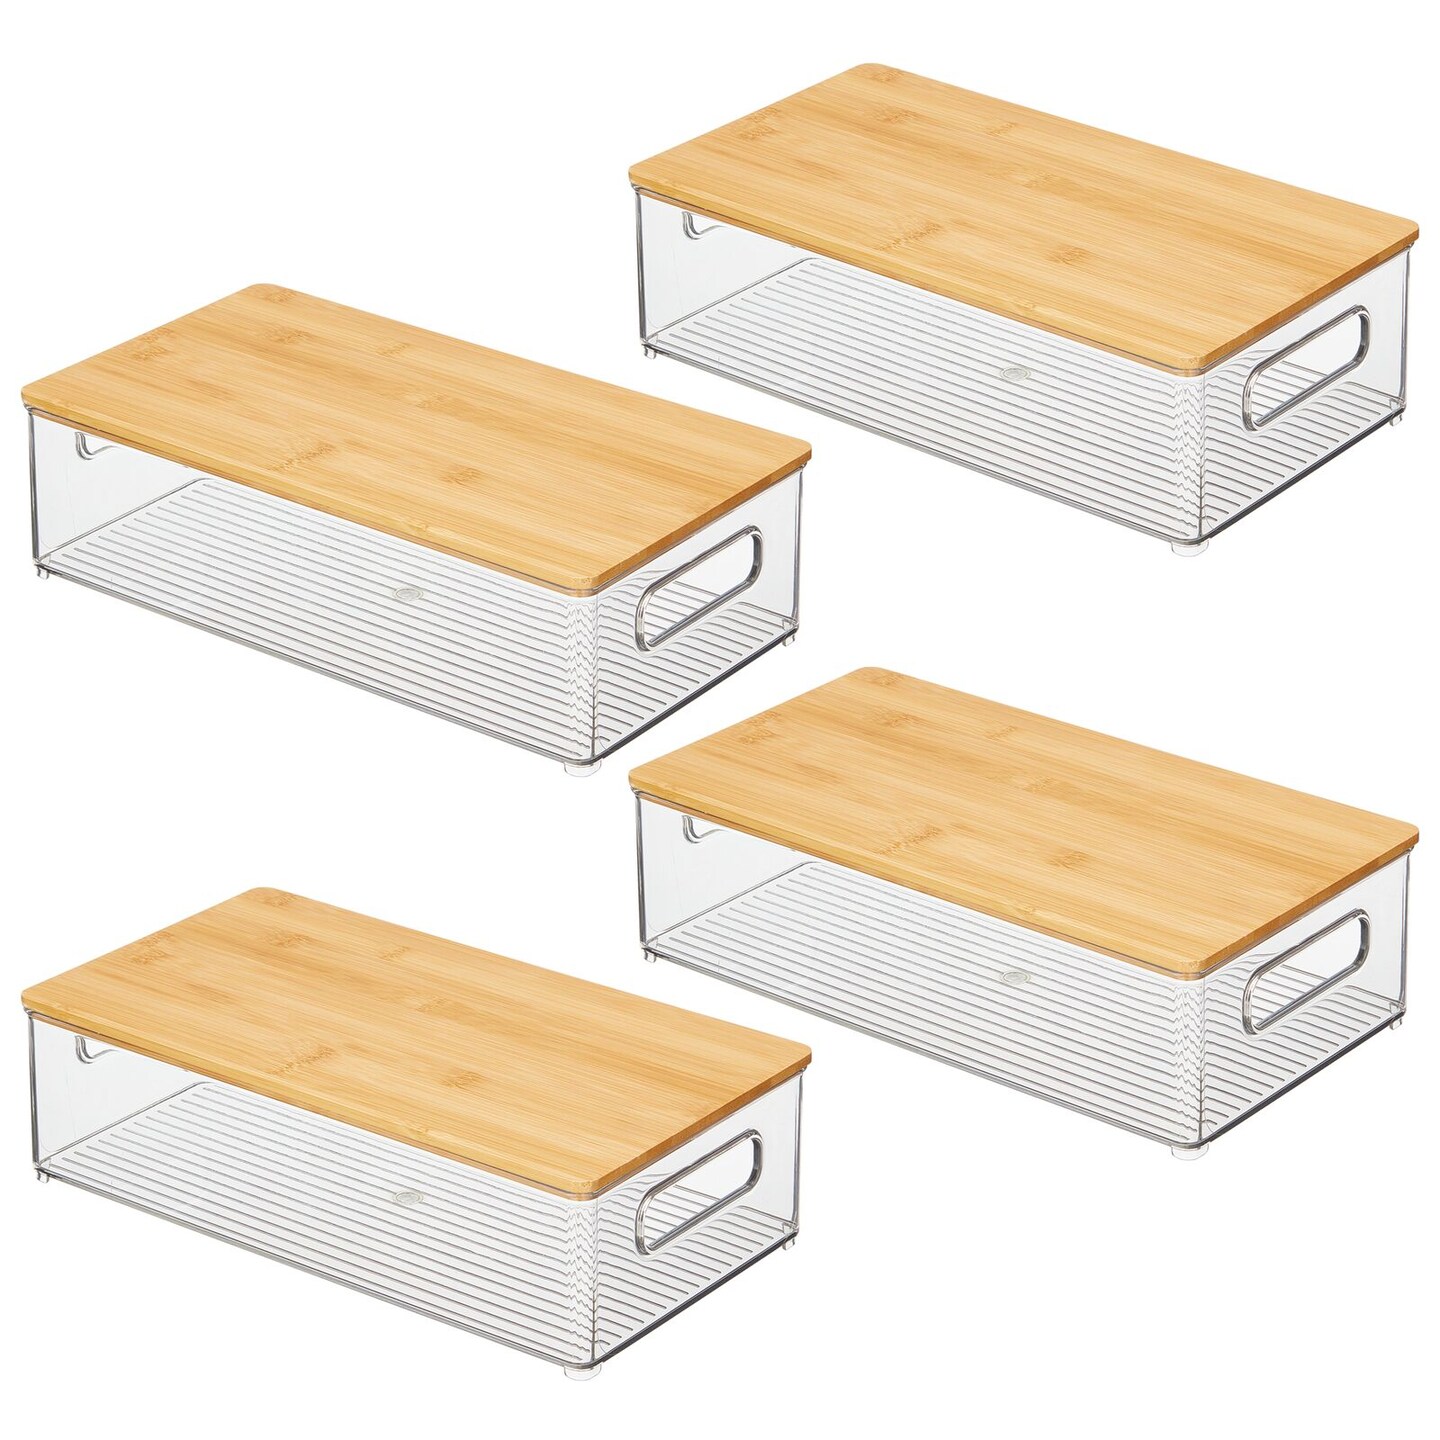 mDesign Plastic Kitchen Food Storage Bin with Bamboo Lid, 4 Pack - Clear,  11.25 x 8 x 6